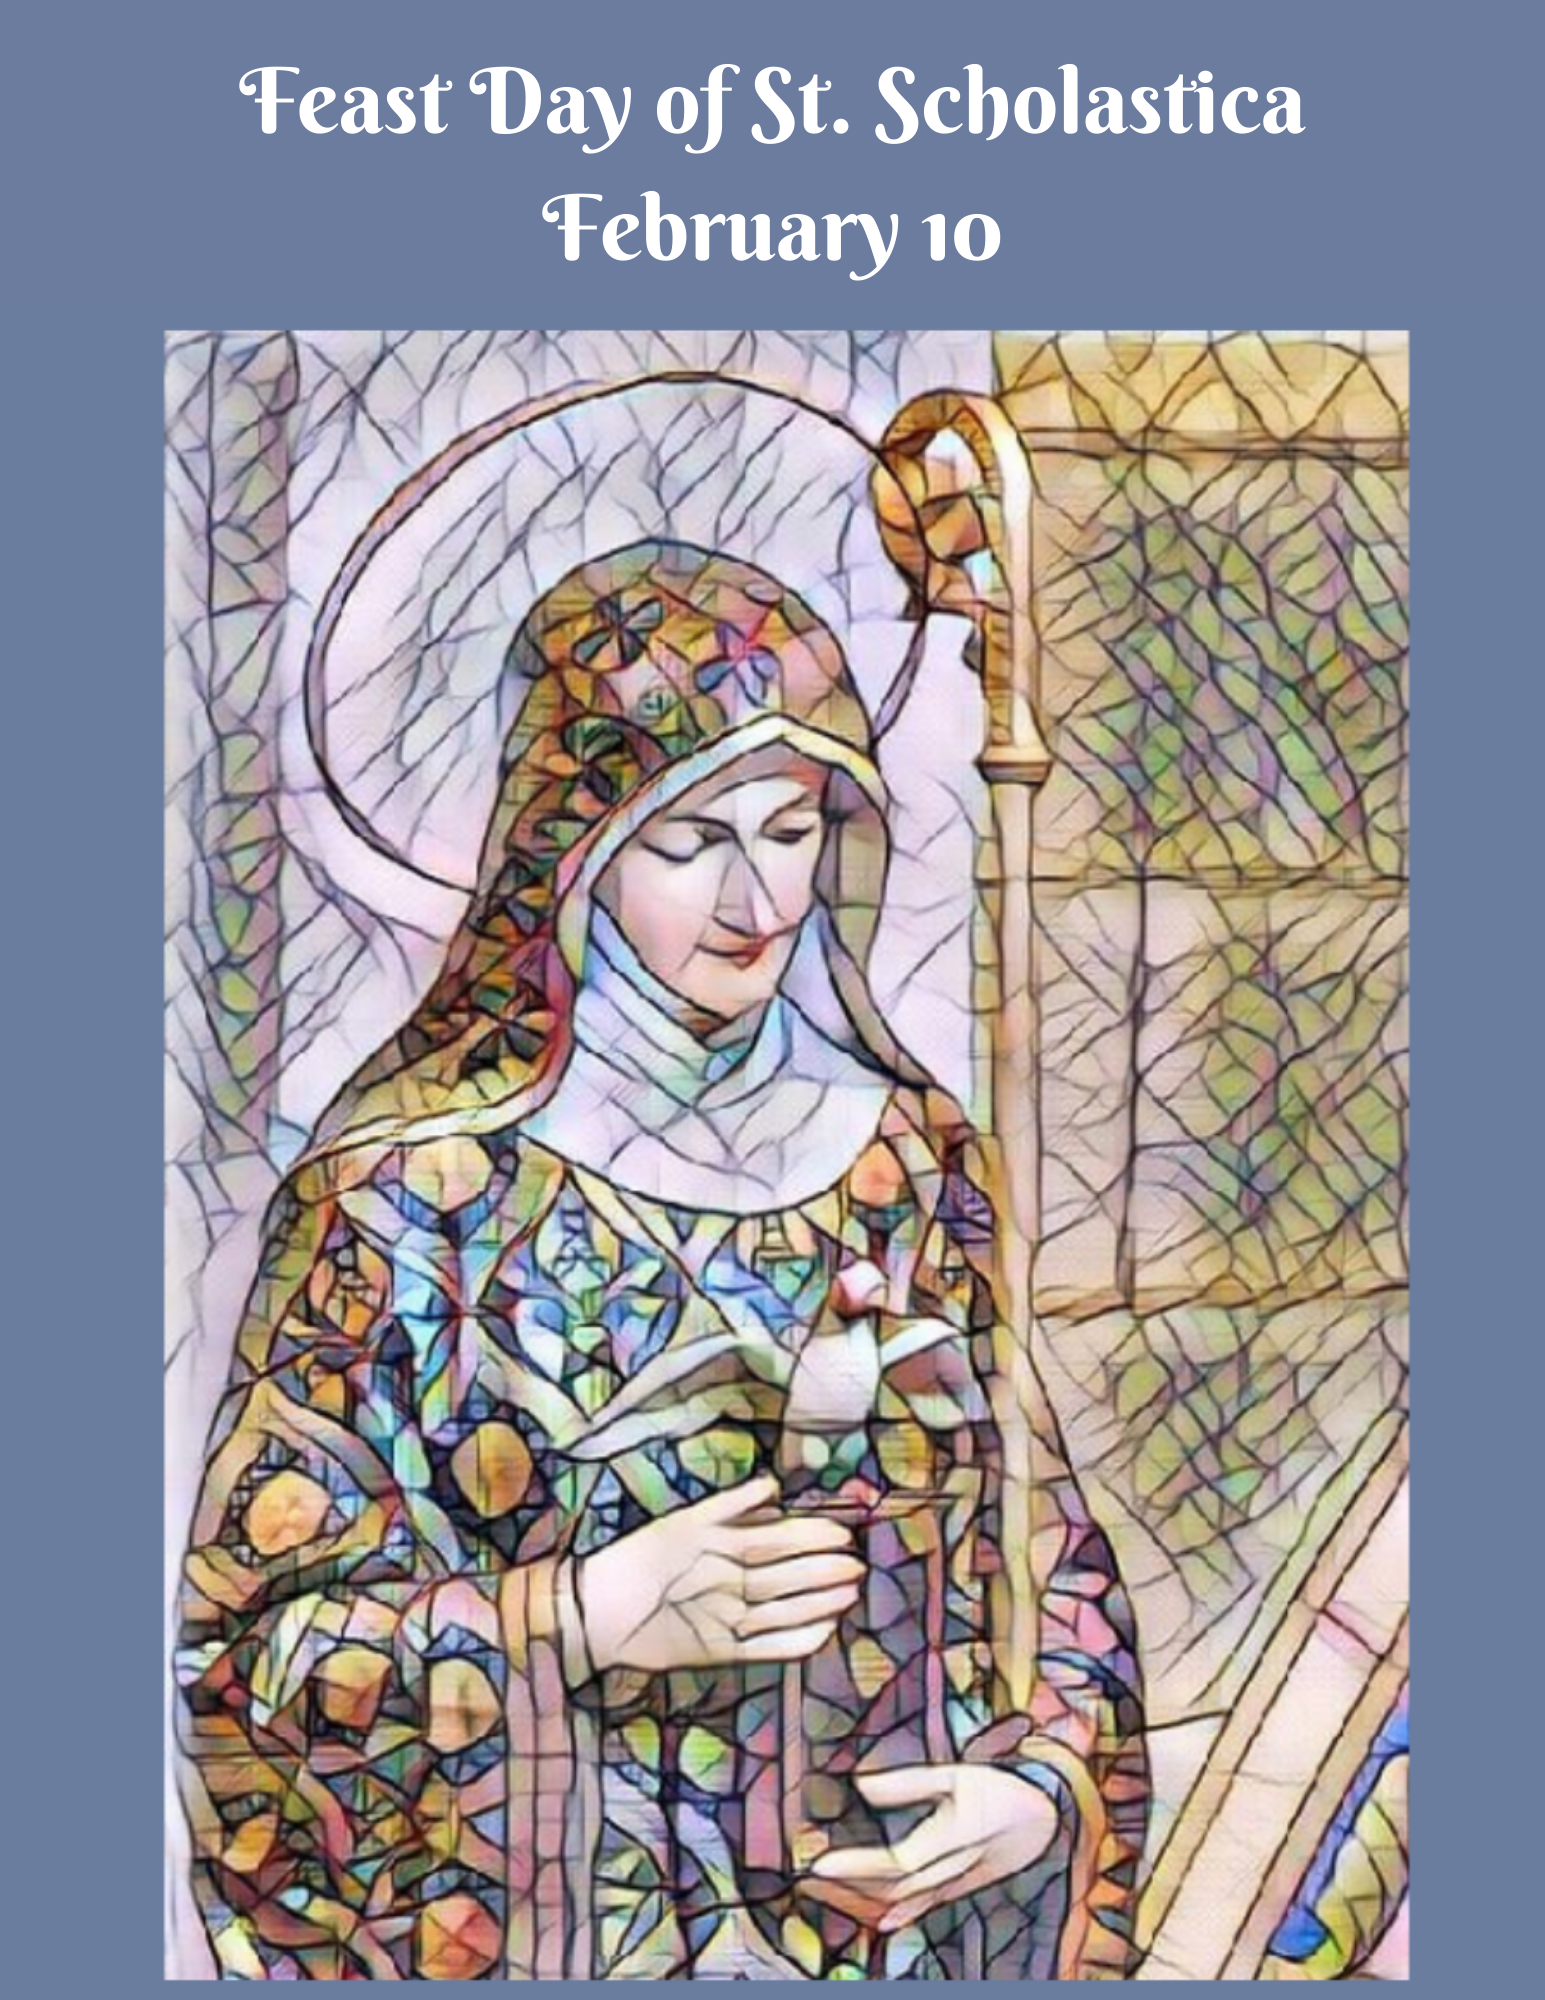 Feast Day of St. Scholastica